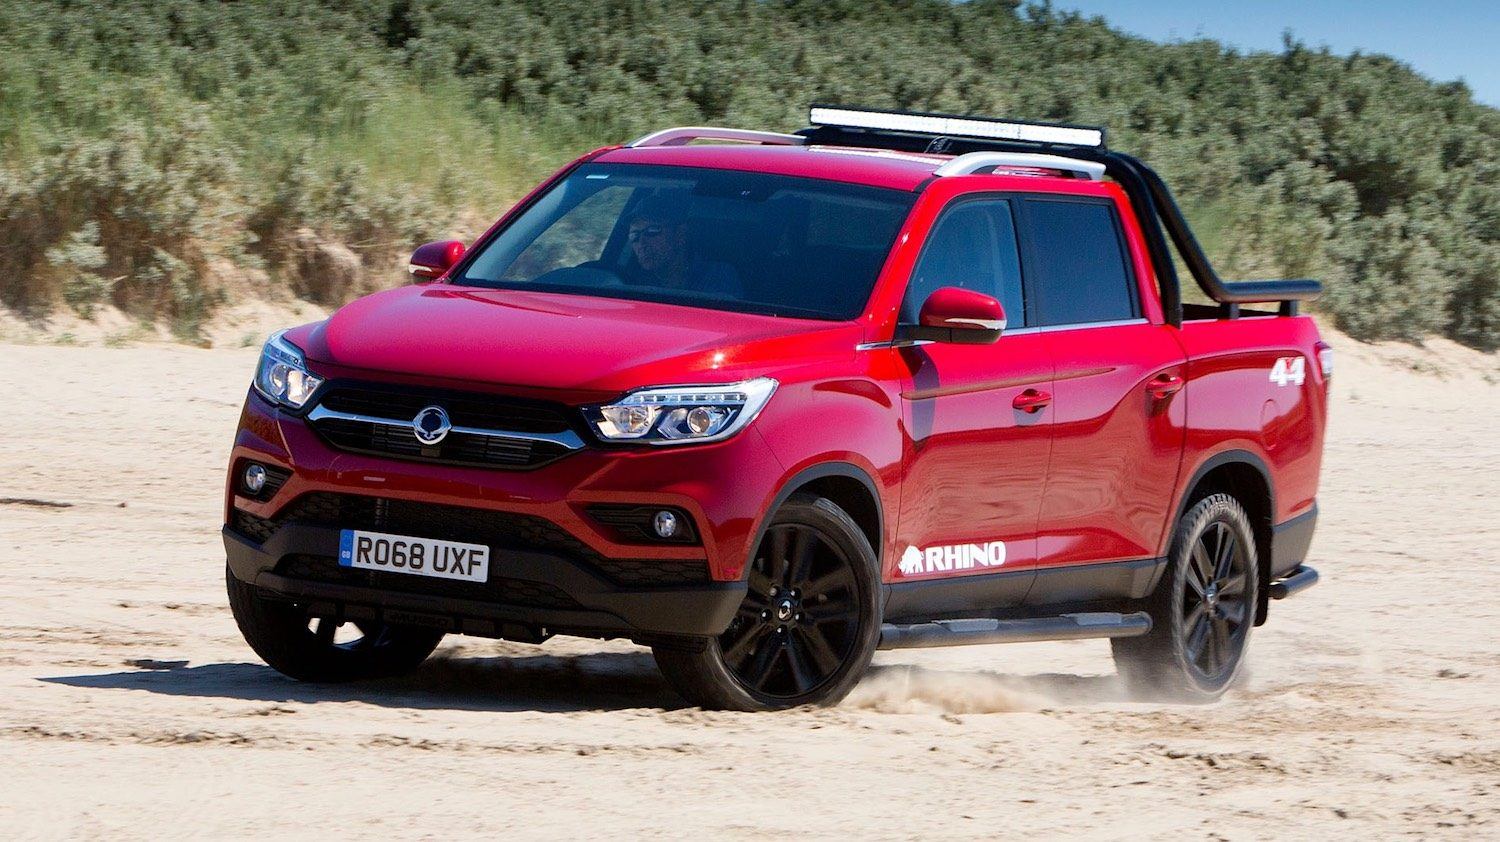 ws-the-New-SsangYong-Musso-Pick-Up-2018-4-1500x842.jpg